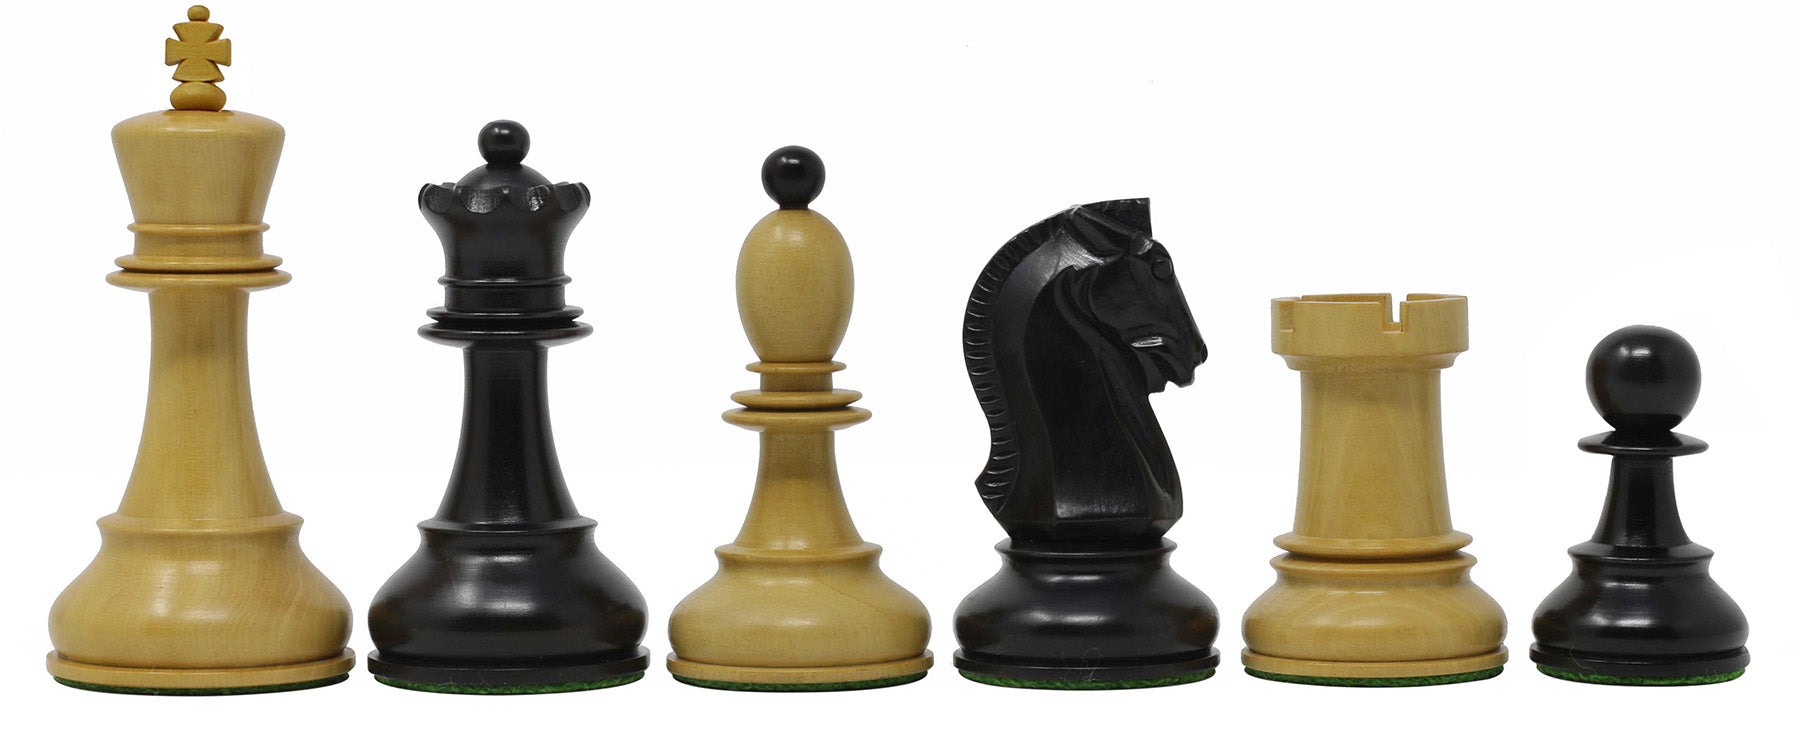 Dubrovnik 1950 Vintage 3.75" Reproduction Chess Set in Ebony Wood